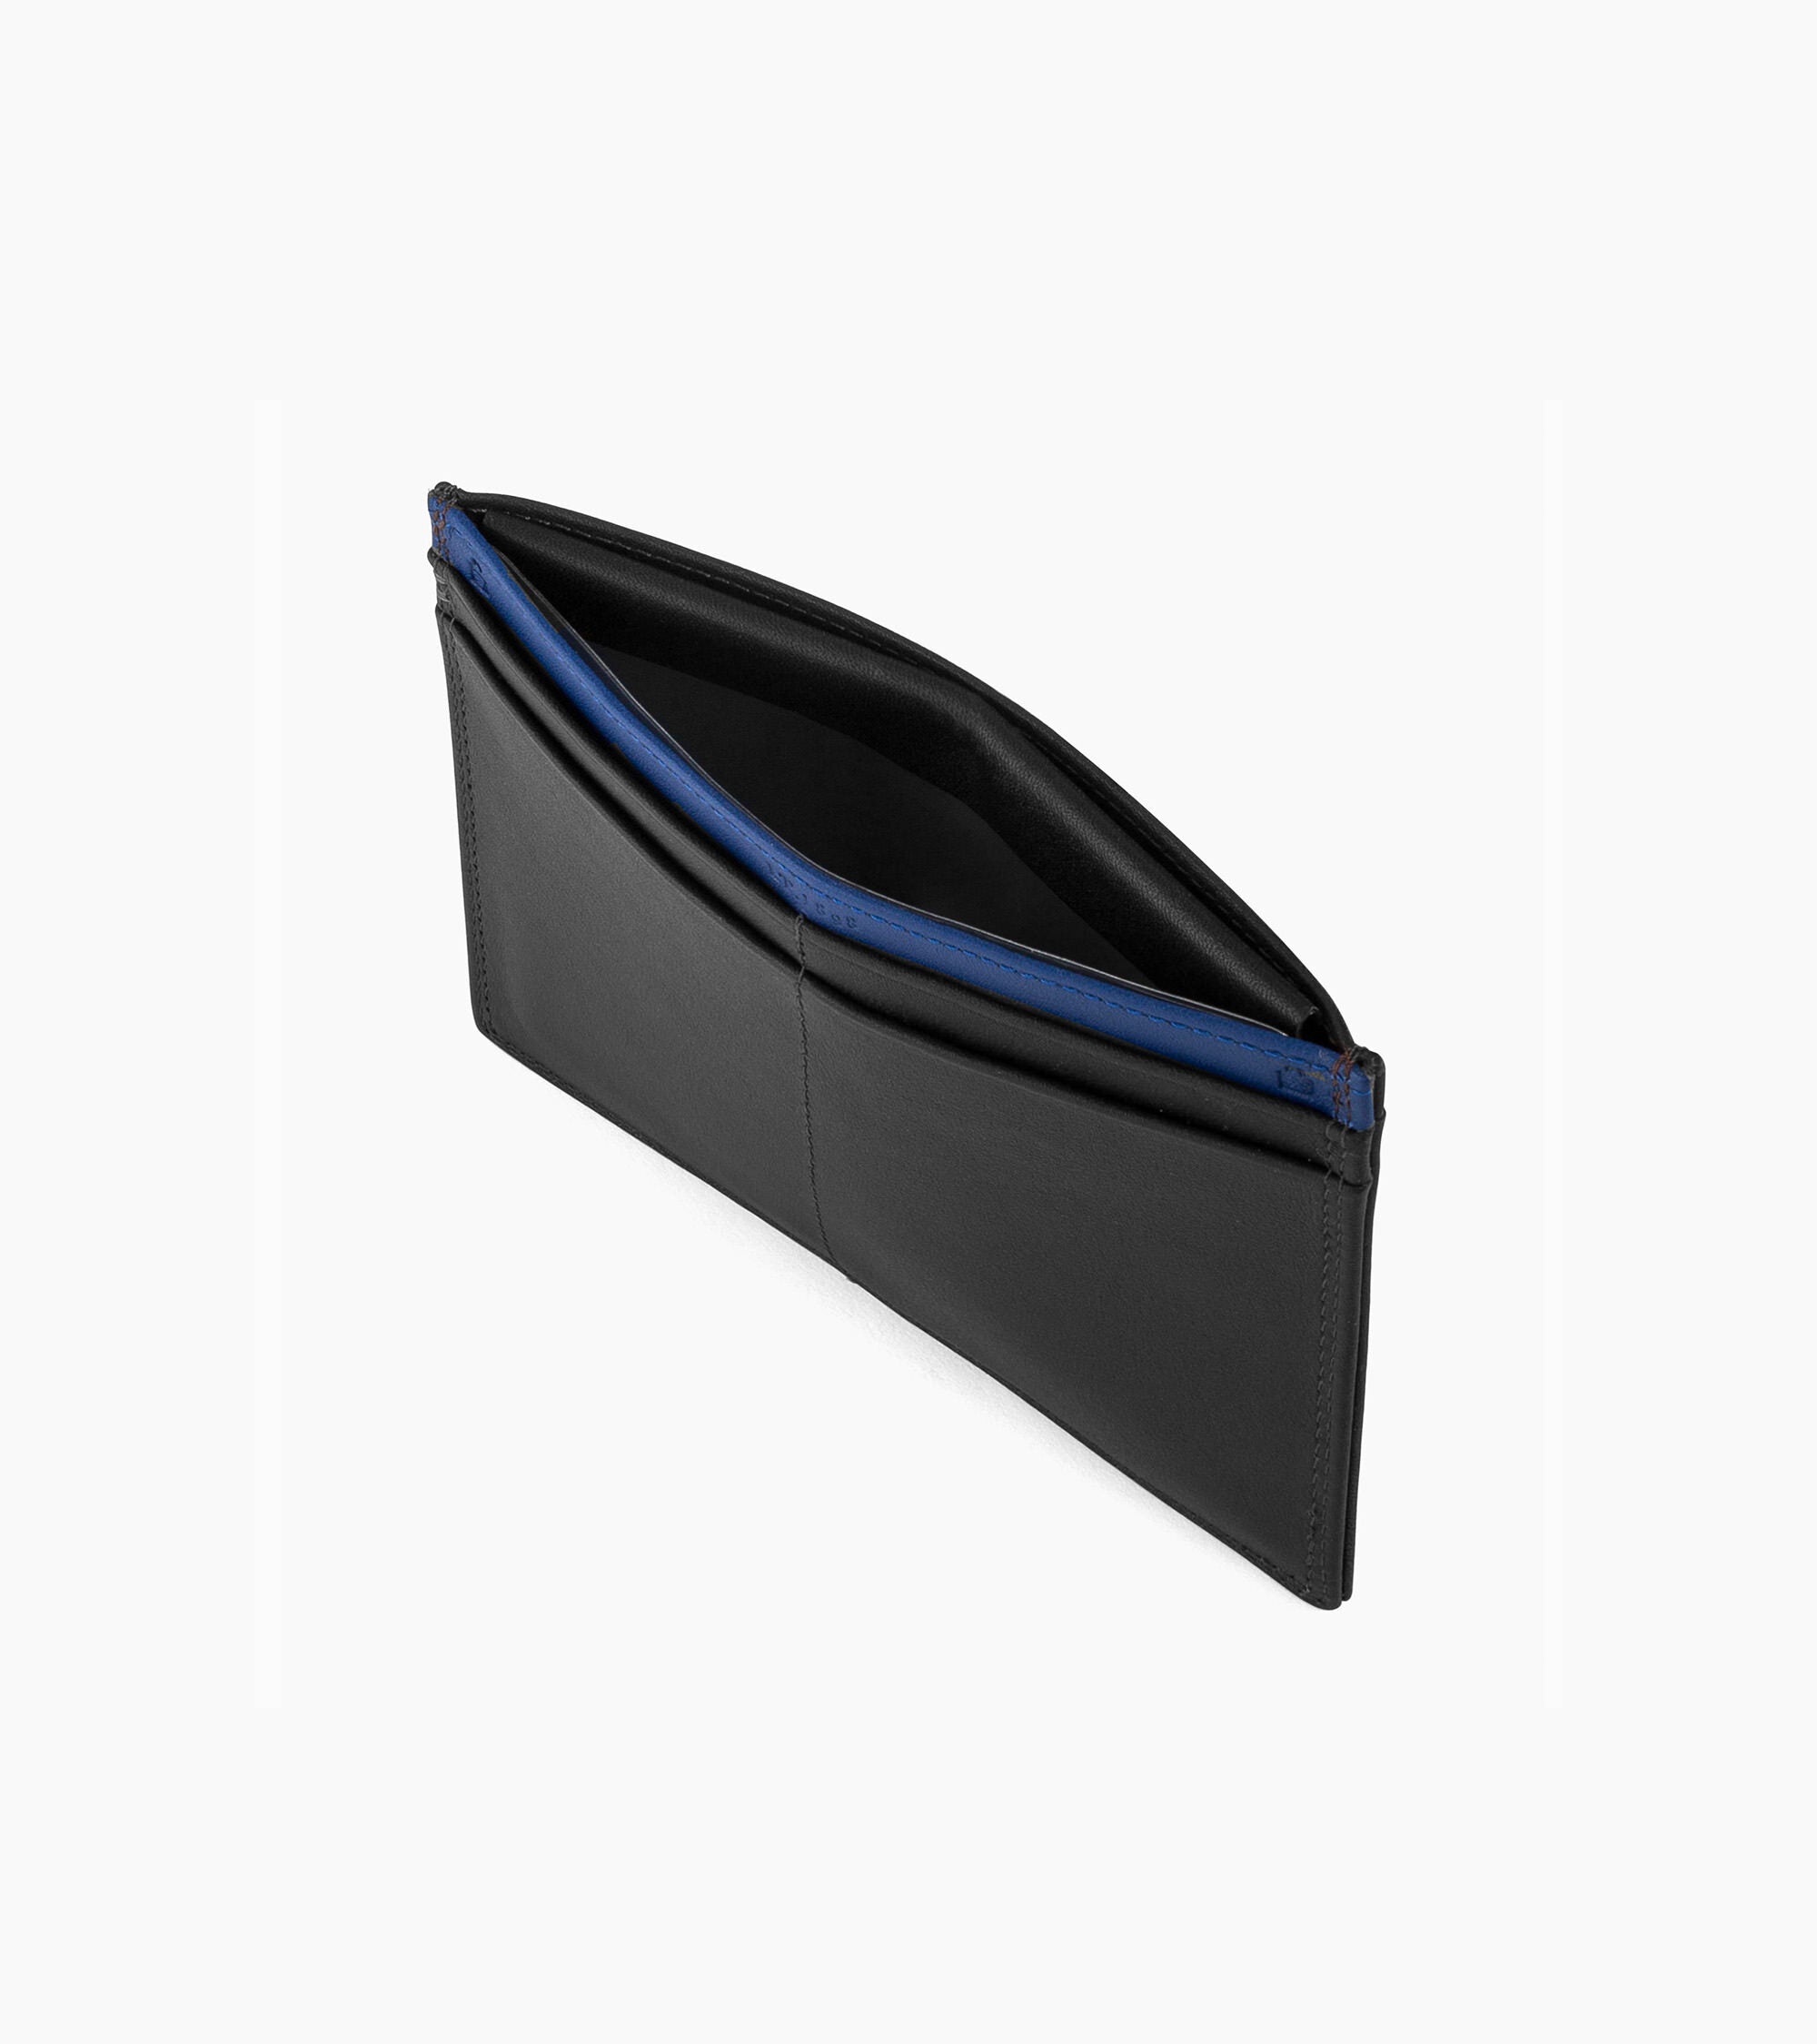 Martin smooth leather Car documents holder